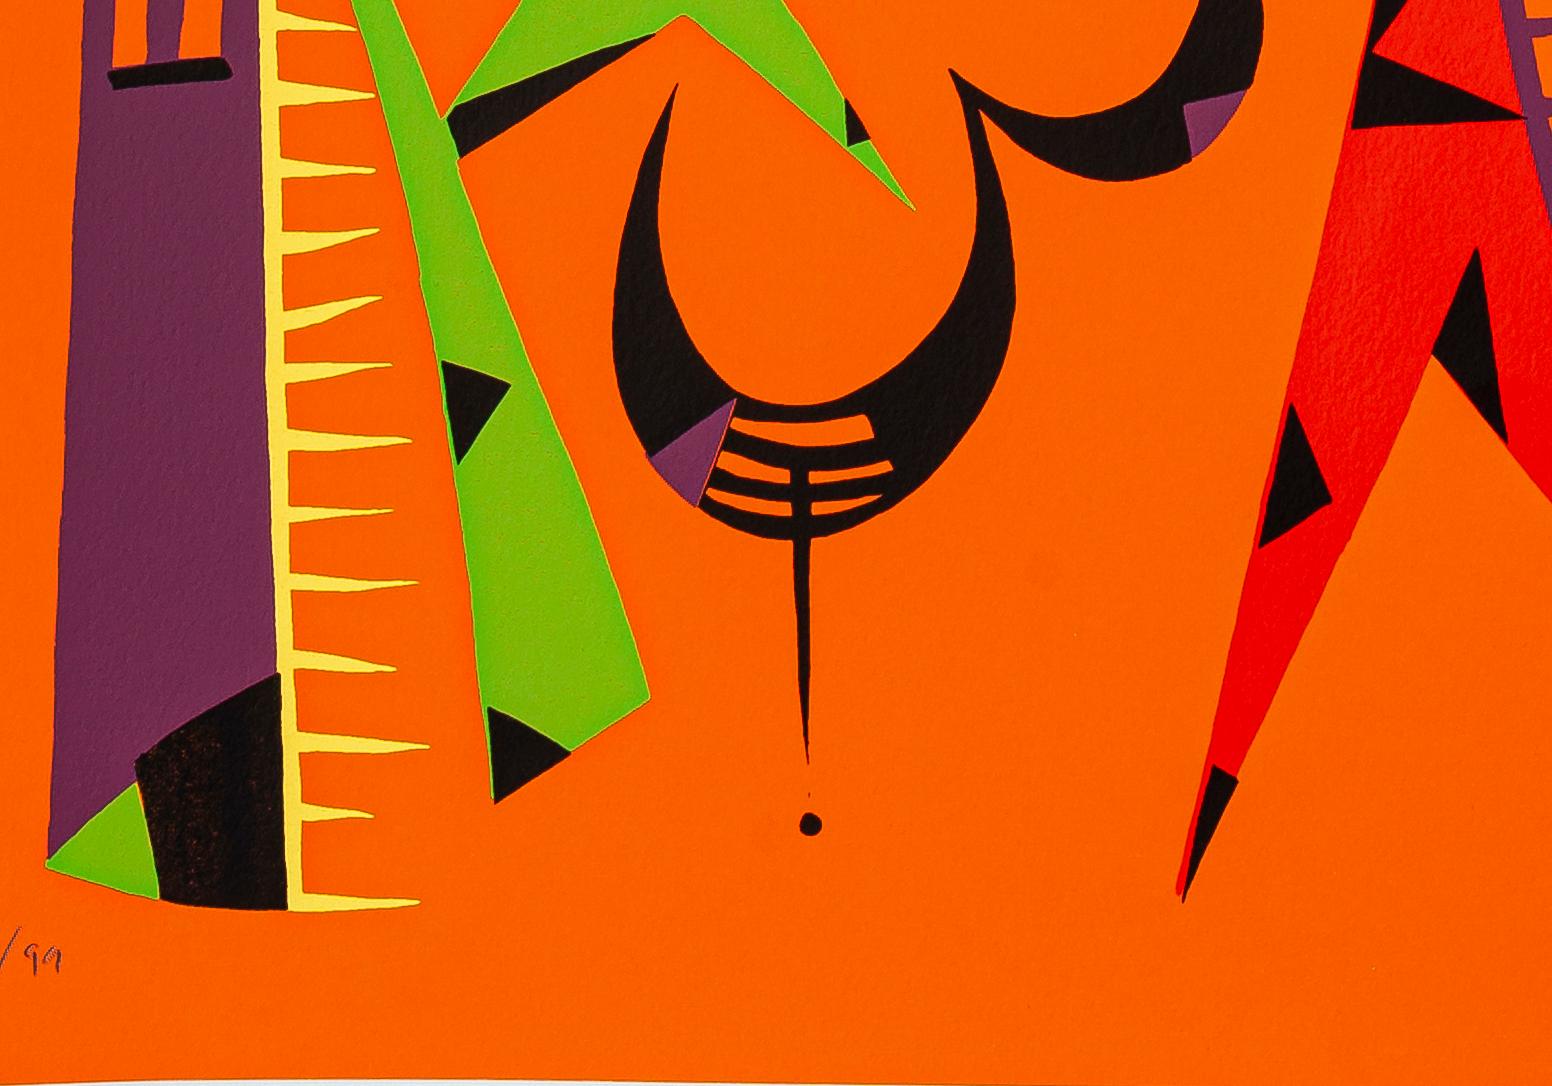 Abstract Composition - Original Lithograph by Raphael Alberti - 1972 - Print by Rafael Alberti